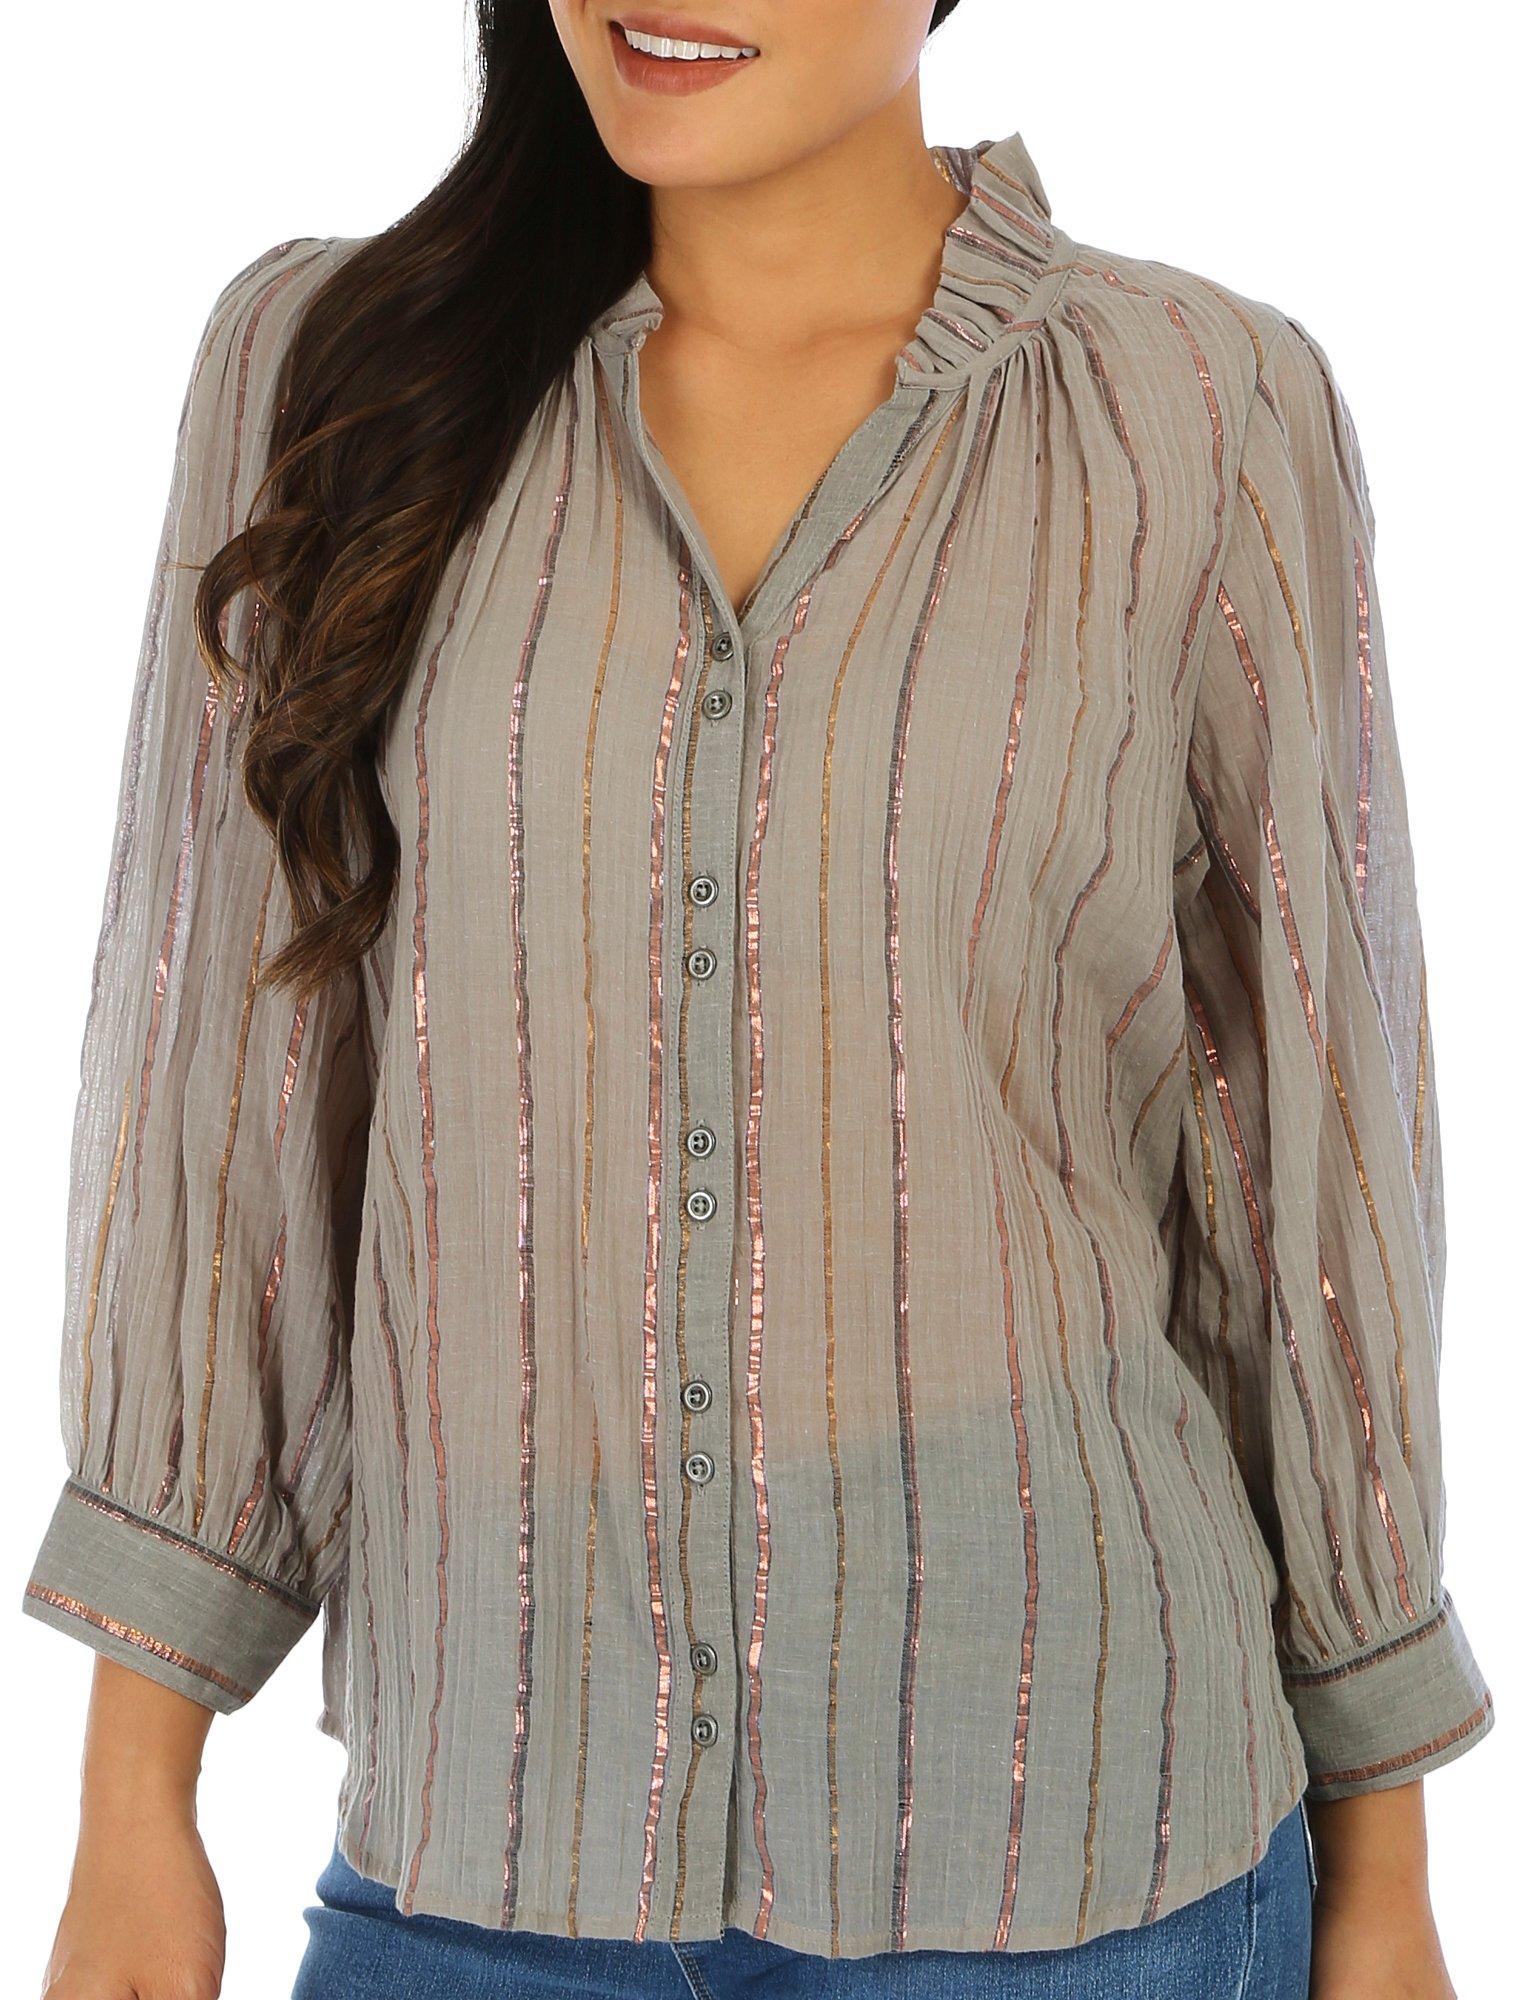 Womens Striped Button Long Sleeve Woven Top